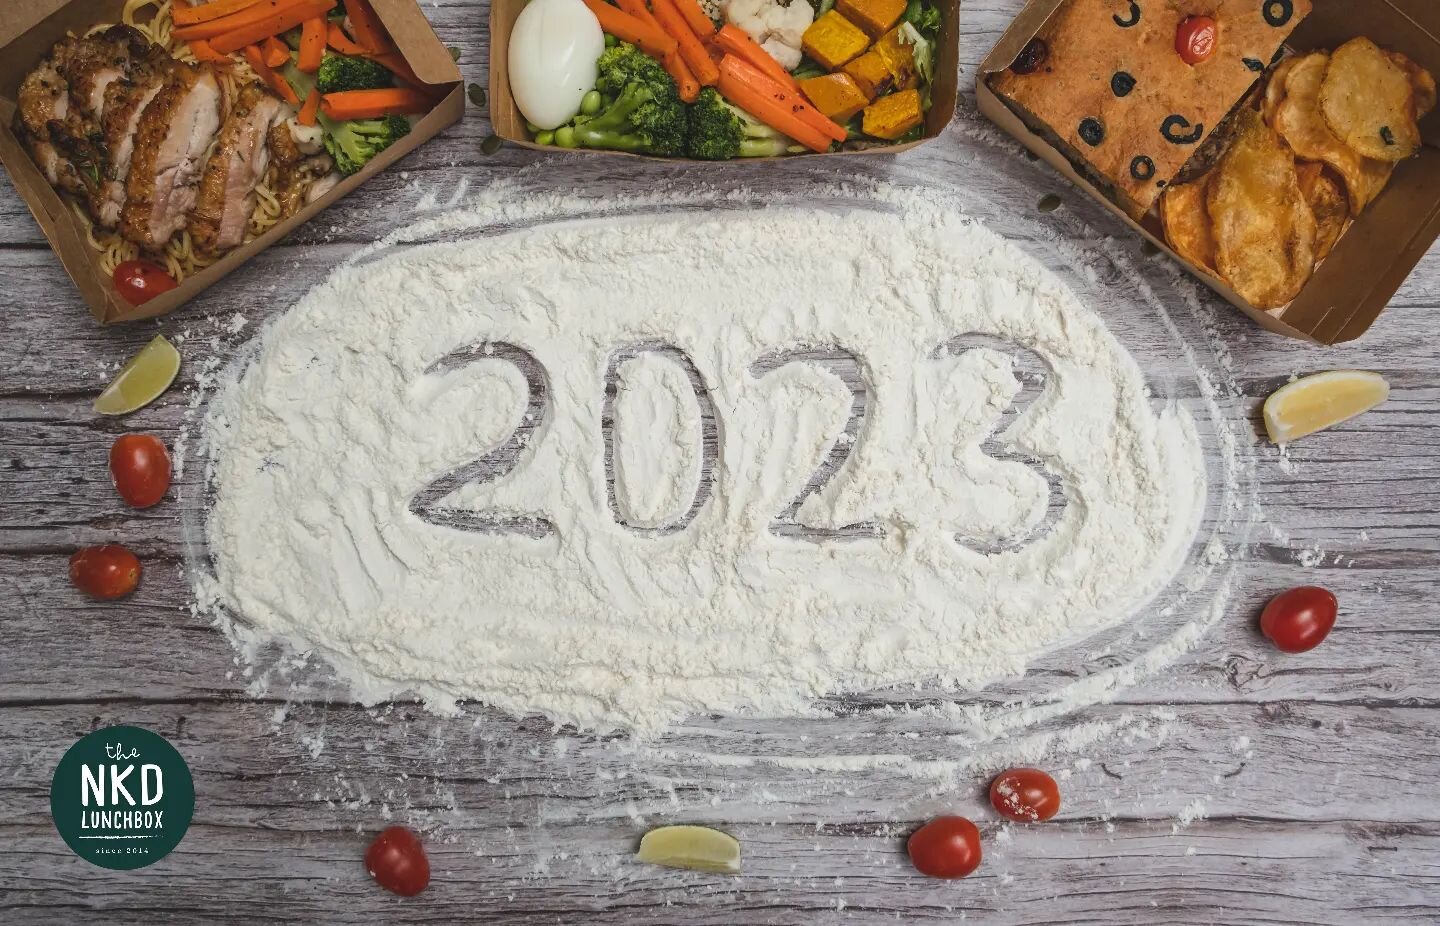 One more year loaded with sweet recollections and cheerful times has passed. We hope that we have made your year exceptional with our food as we continue to bring you even more healthy and delicious meals in 2023 and beyond. We wish for you to have y